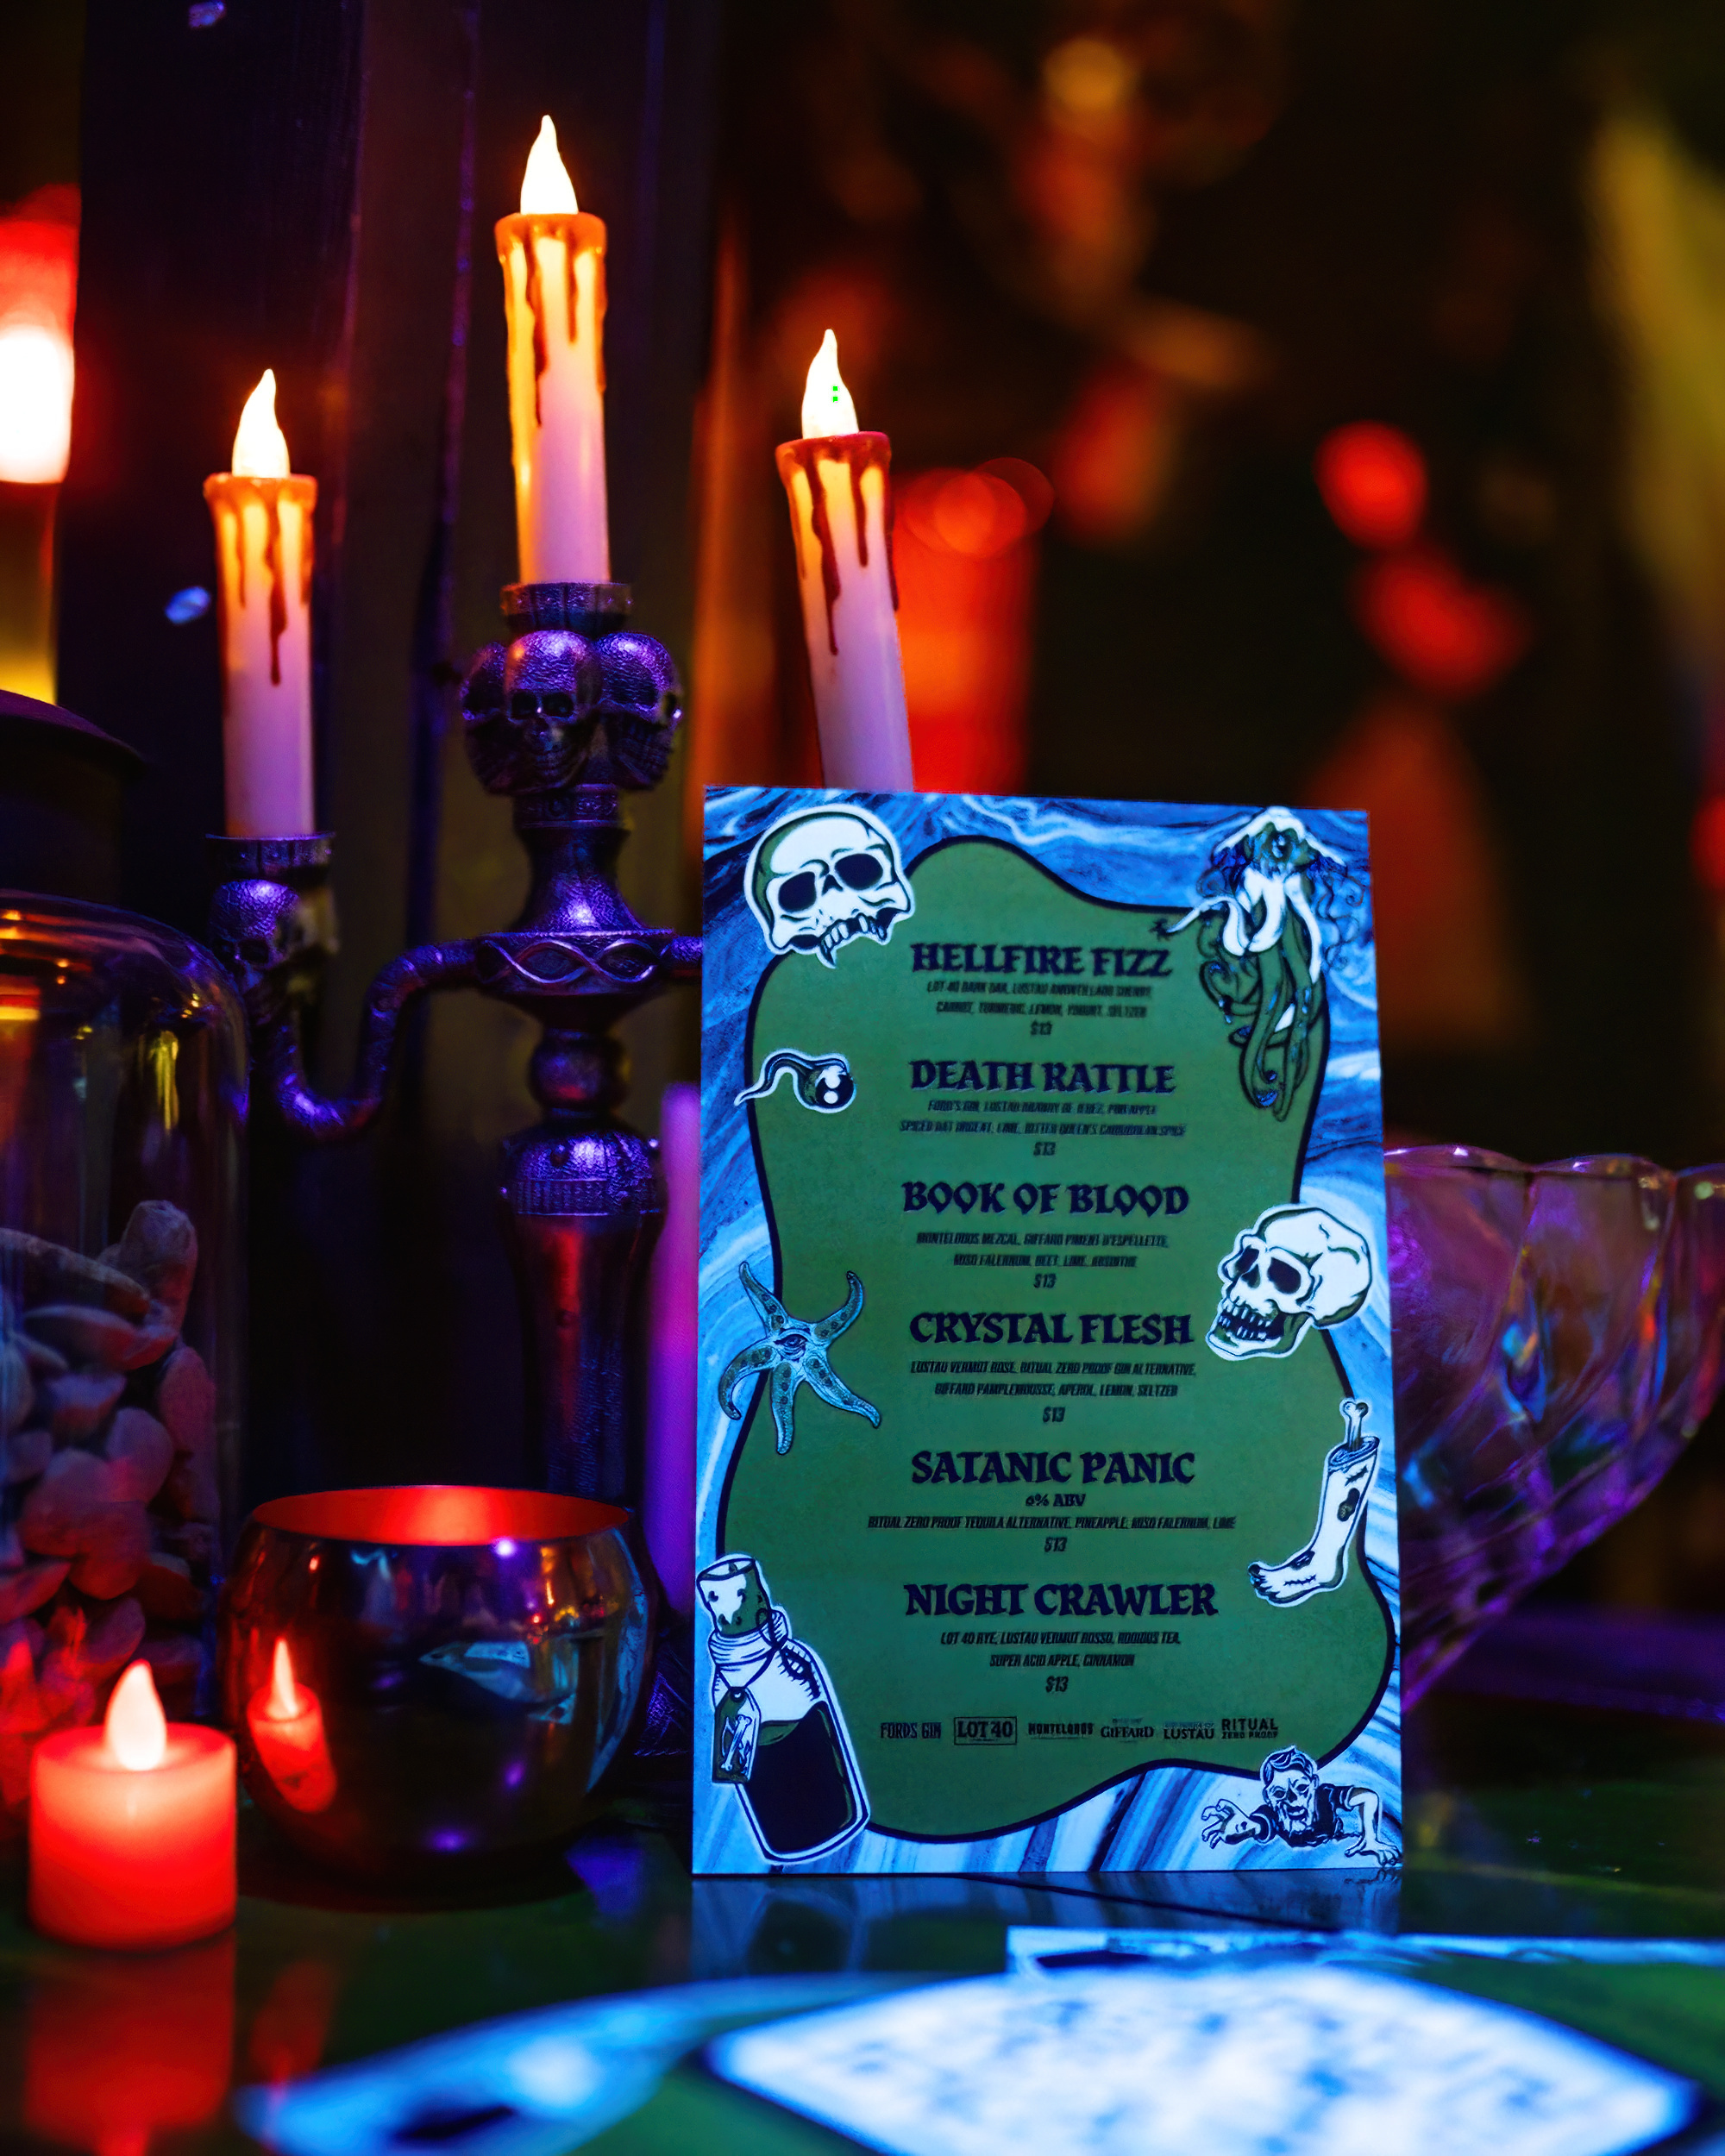 Black Lagoon's Halloween pop-up bar is back to spook New York